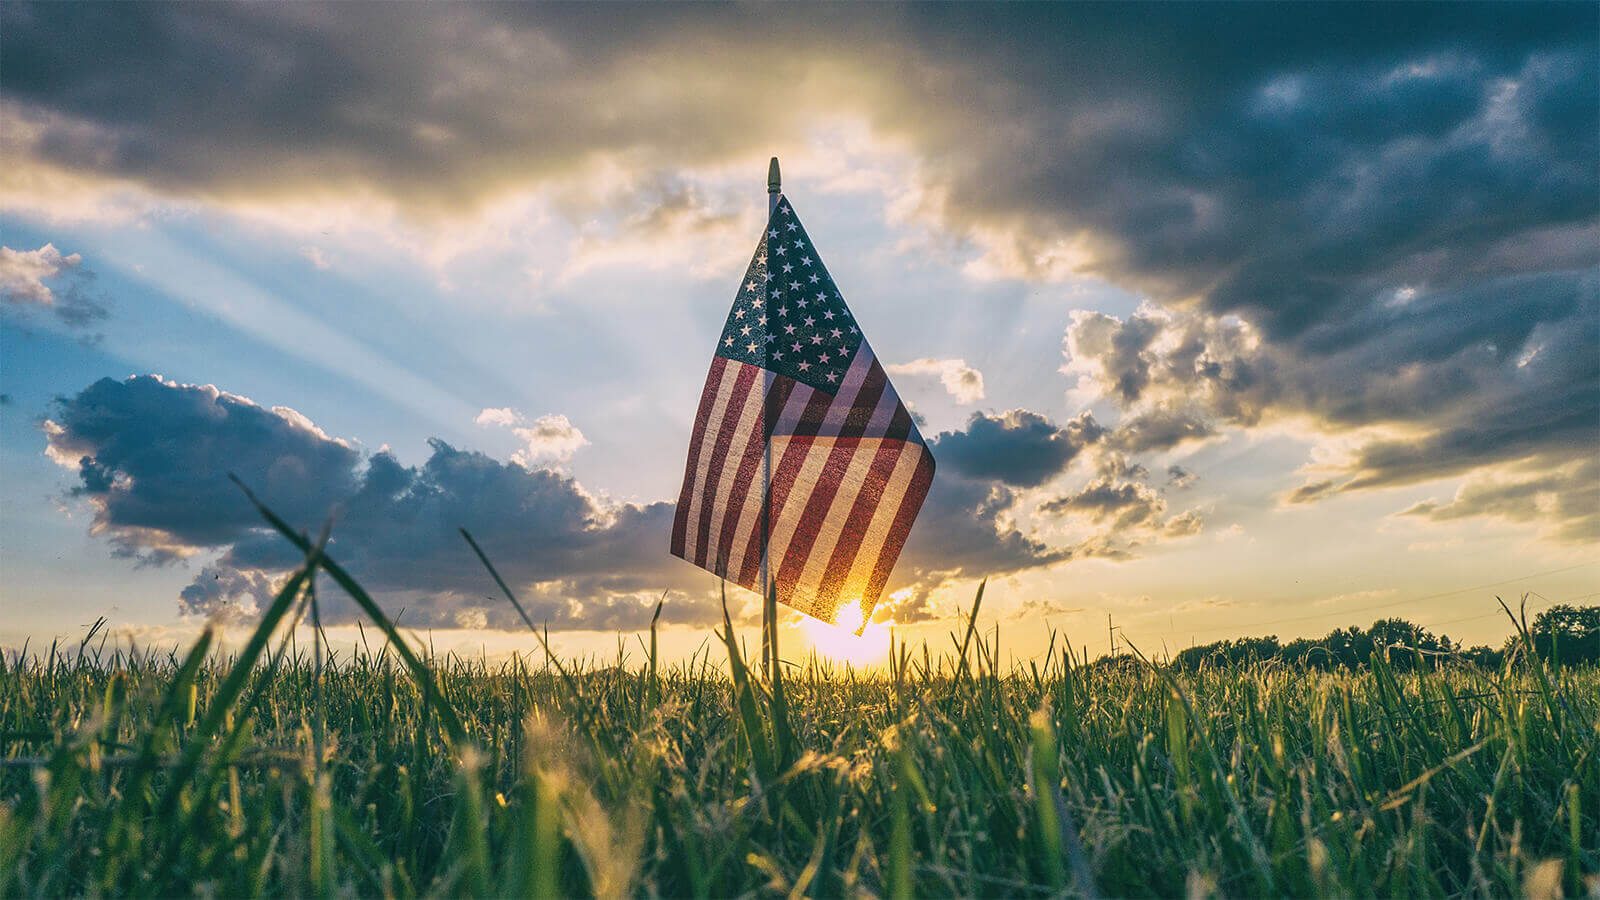 Phootgraph of a US flag in a field with a sunset in the background